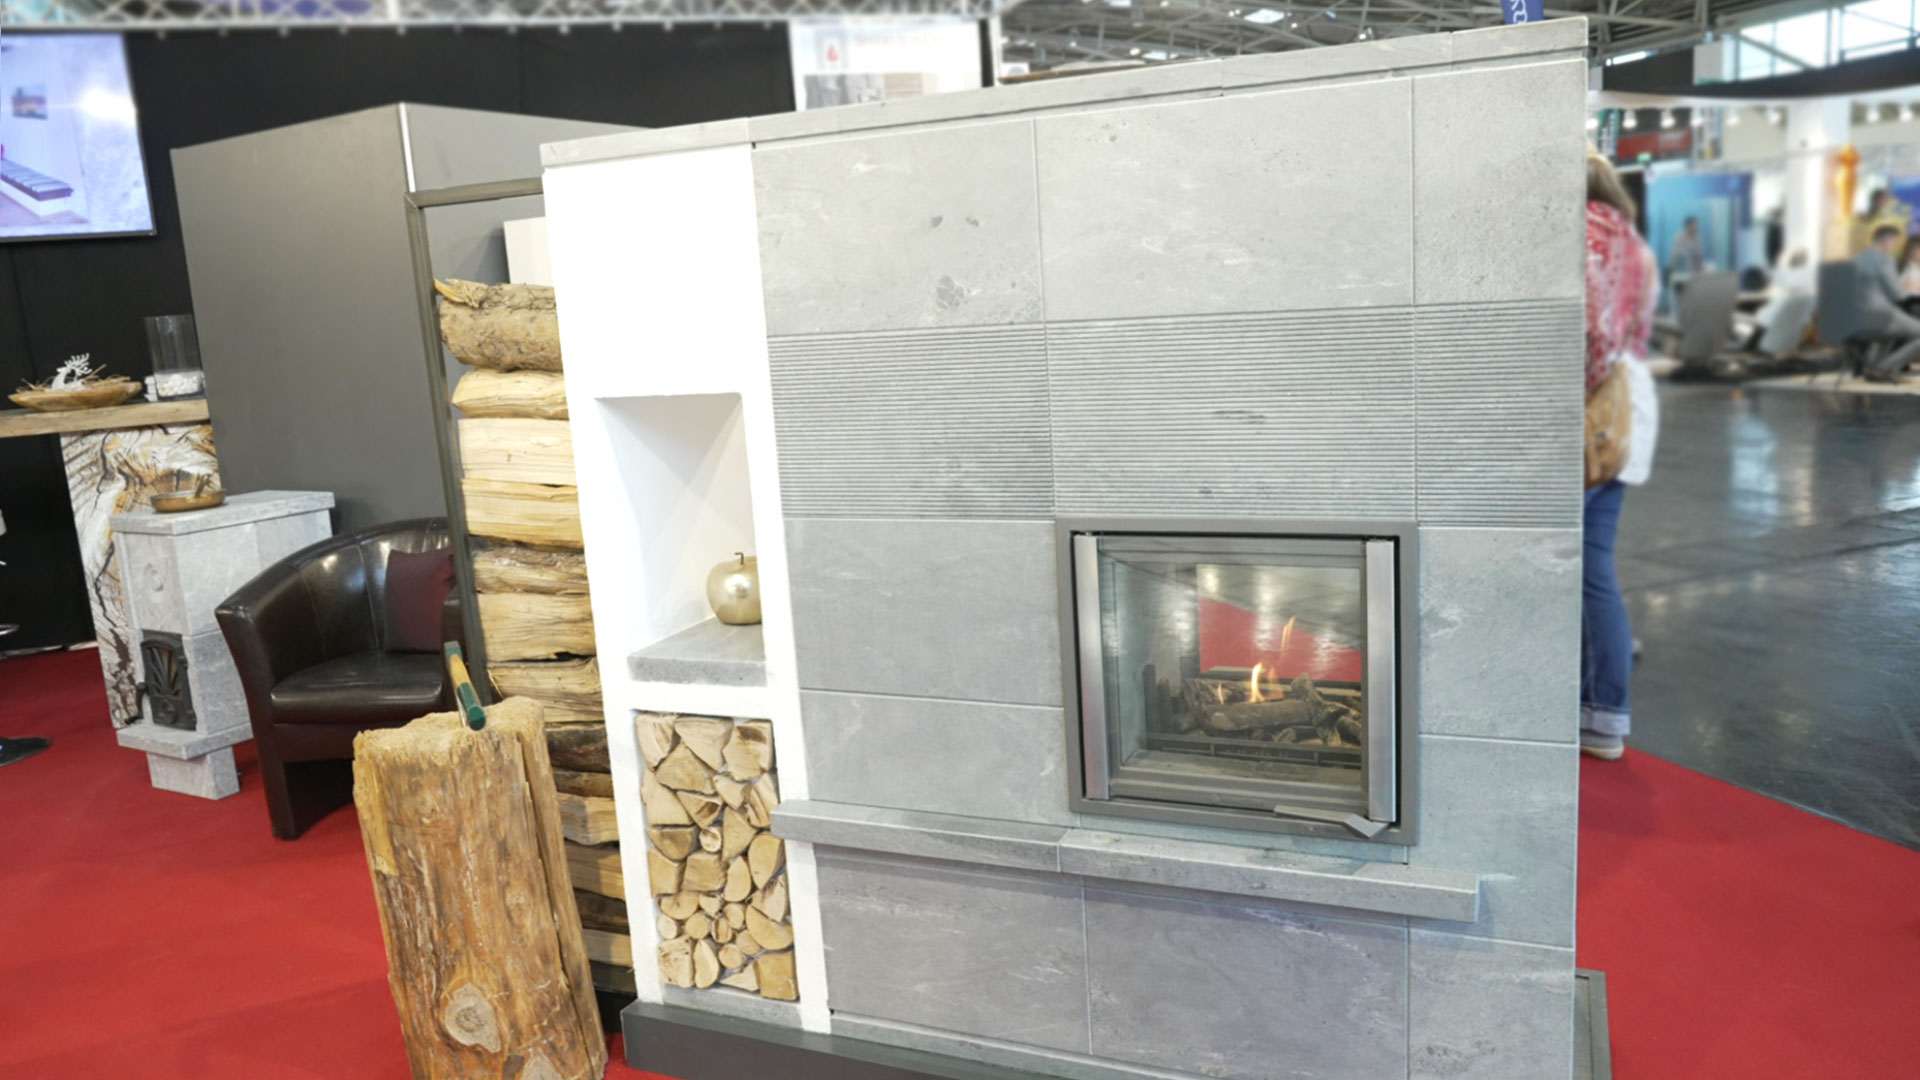 Heating with soapstone stove